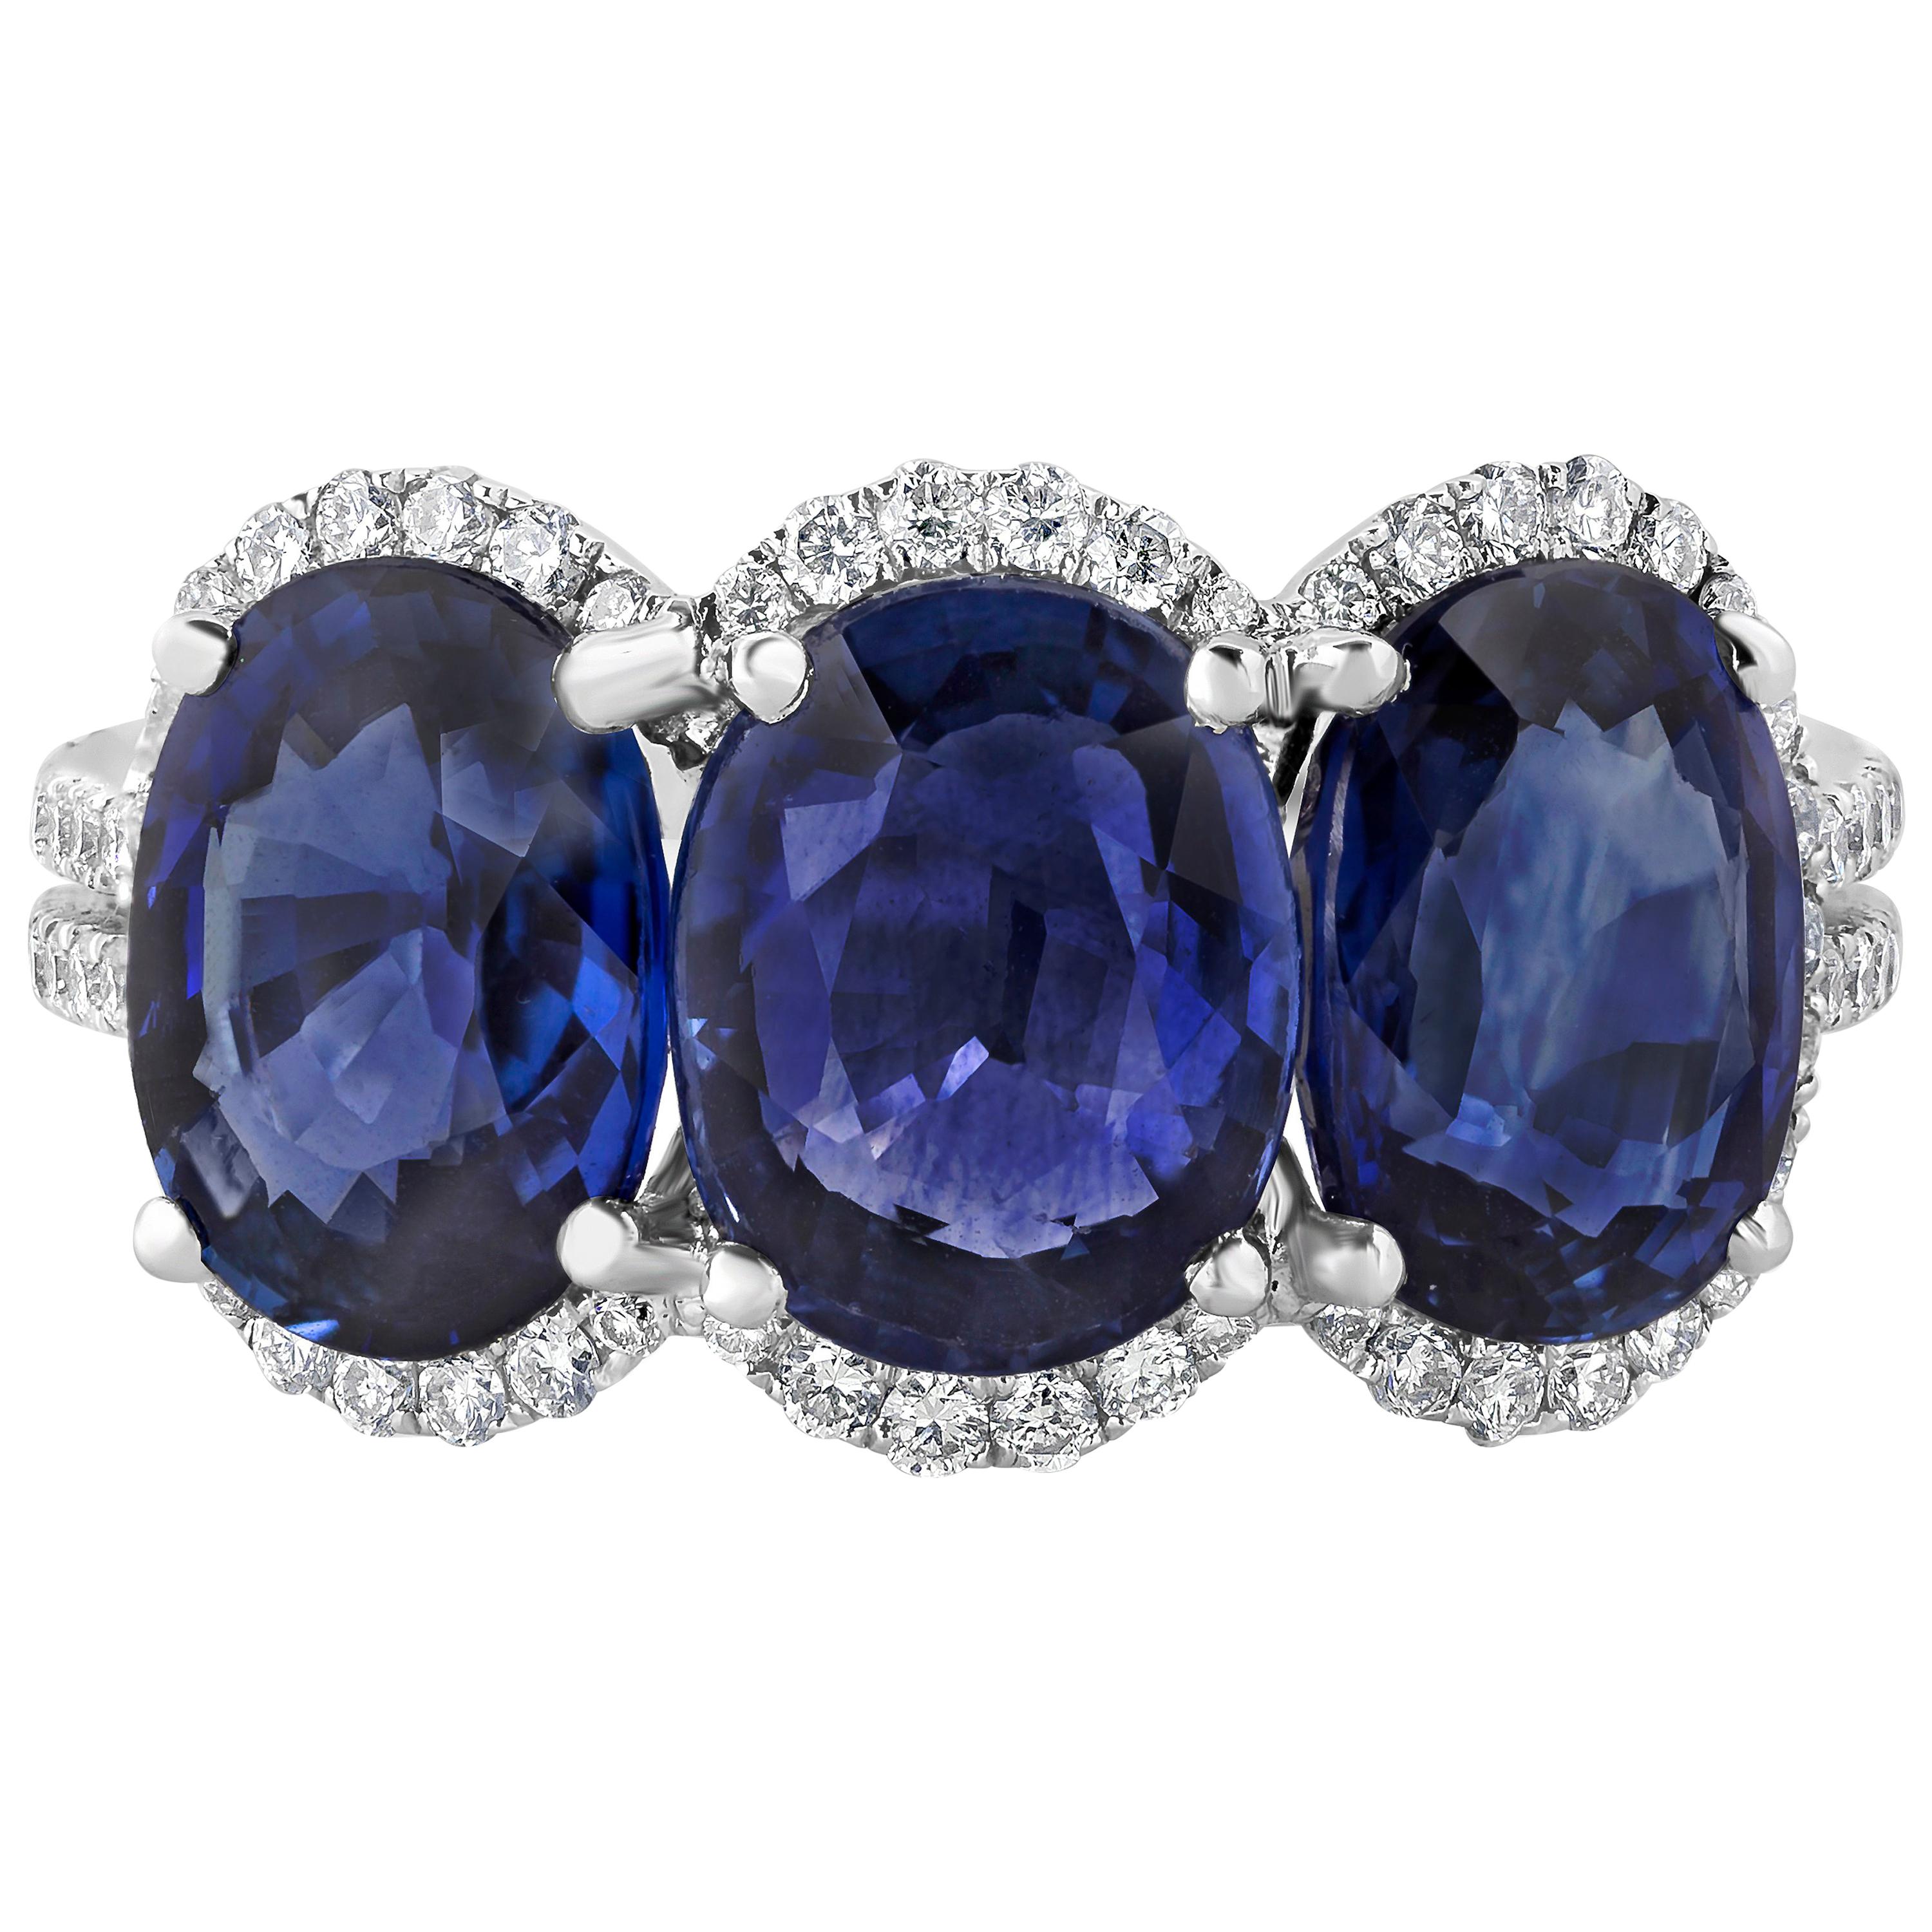 Roman Malakov 6.07 Carats Total Oval Cut Blue Sapphire Three Stone Cocktail Ring For Sale